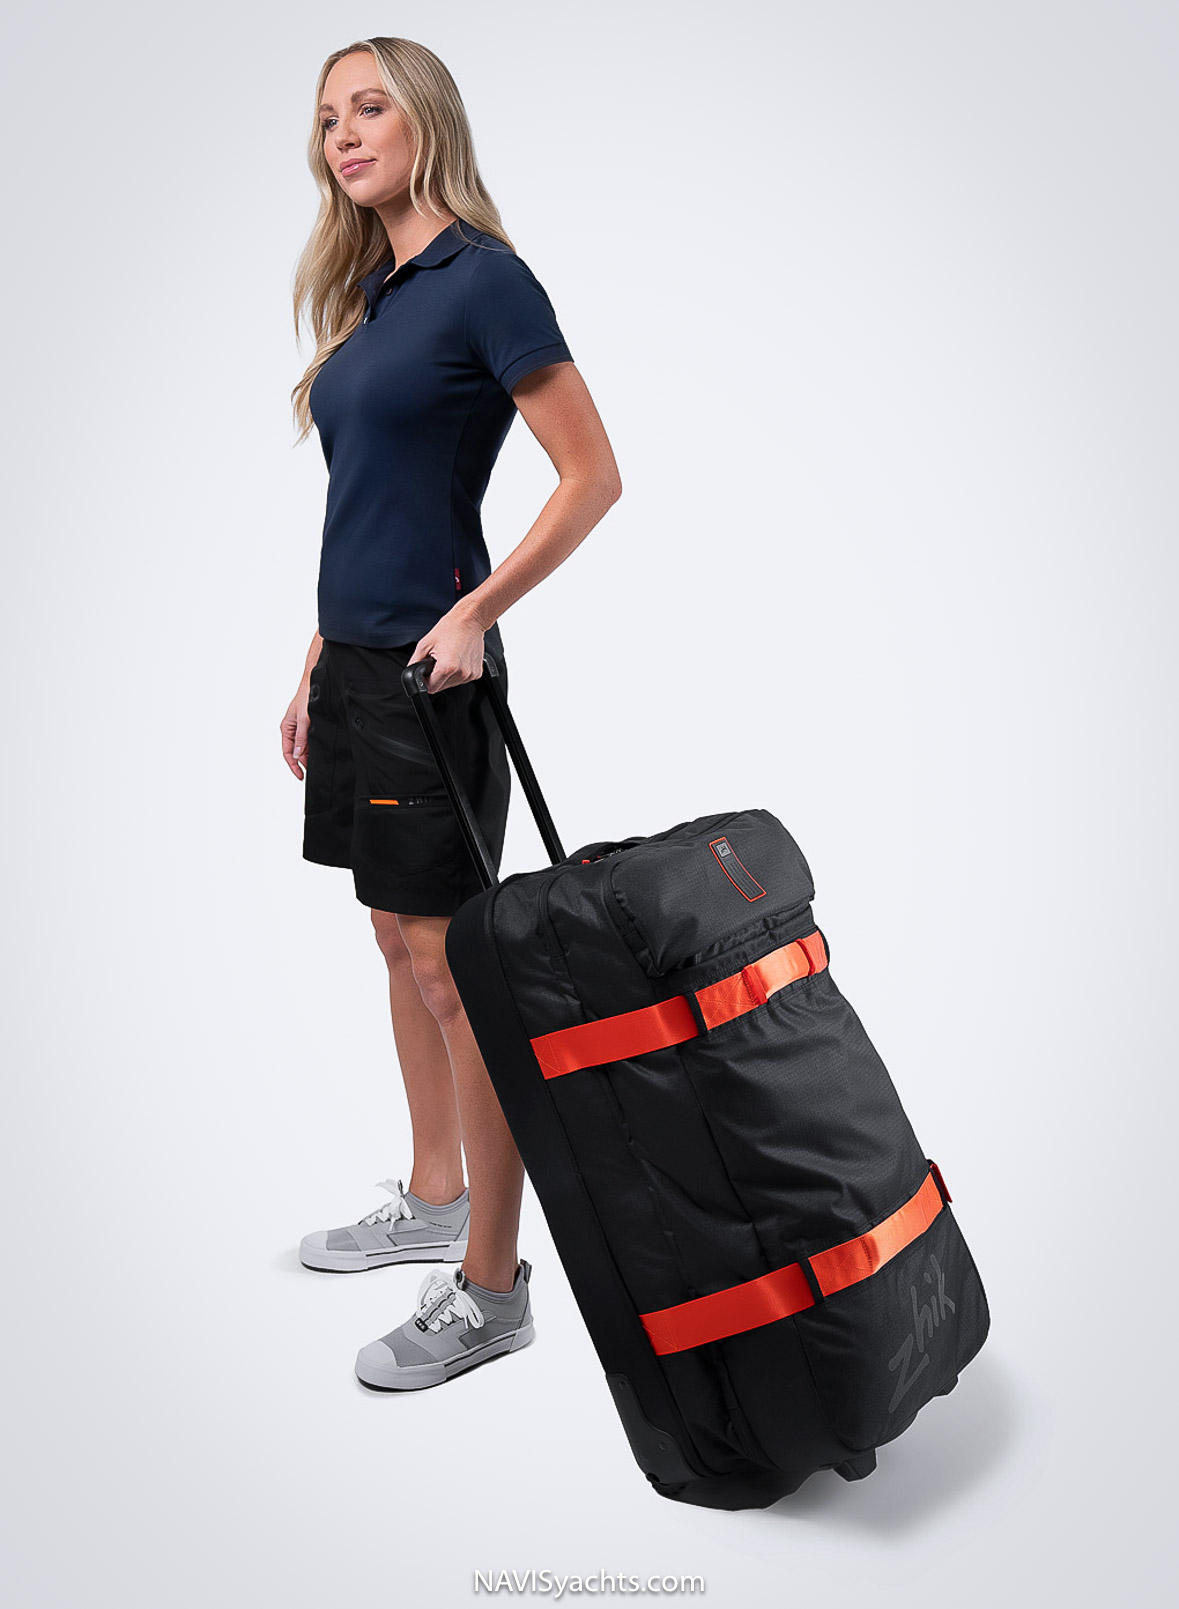 Zhik’s 100L Wheelie Bag is a thoughtfully designed travel solution for those who require ample space and durability in their luggage.